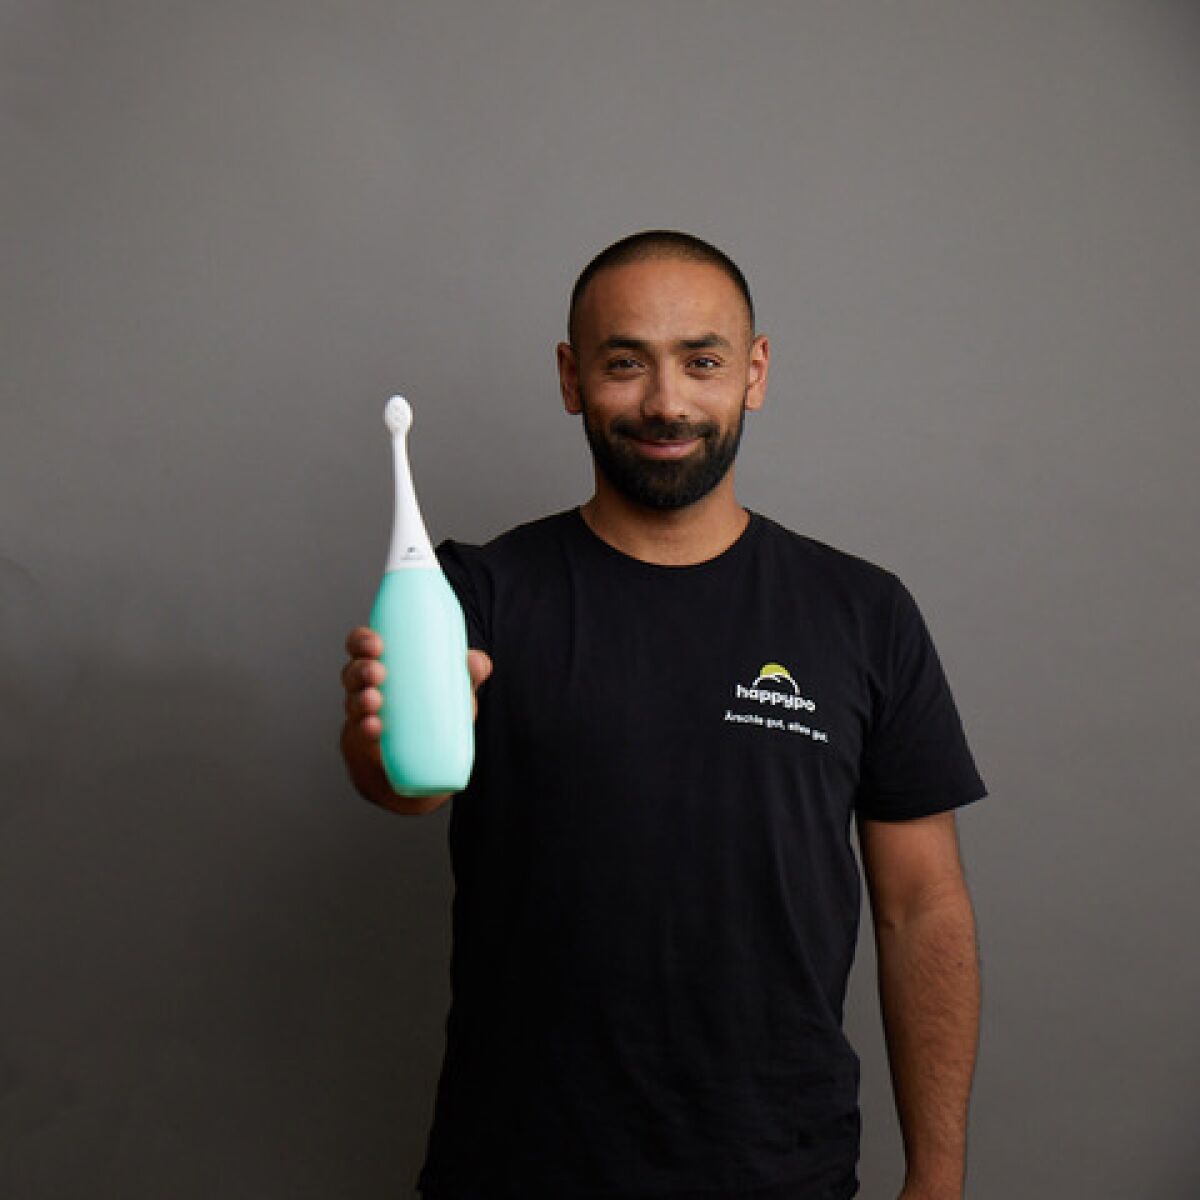 A man in a T-shirt that says "Happy Po" smiles as he holds out his product, a large squeeze bottle.